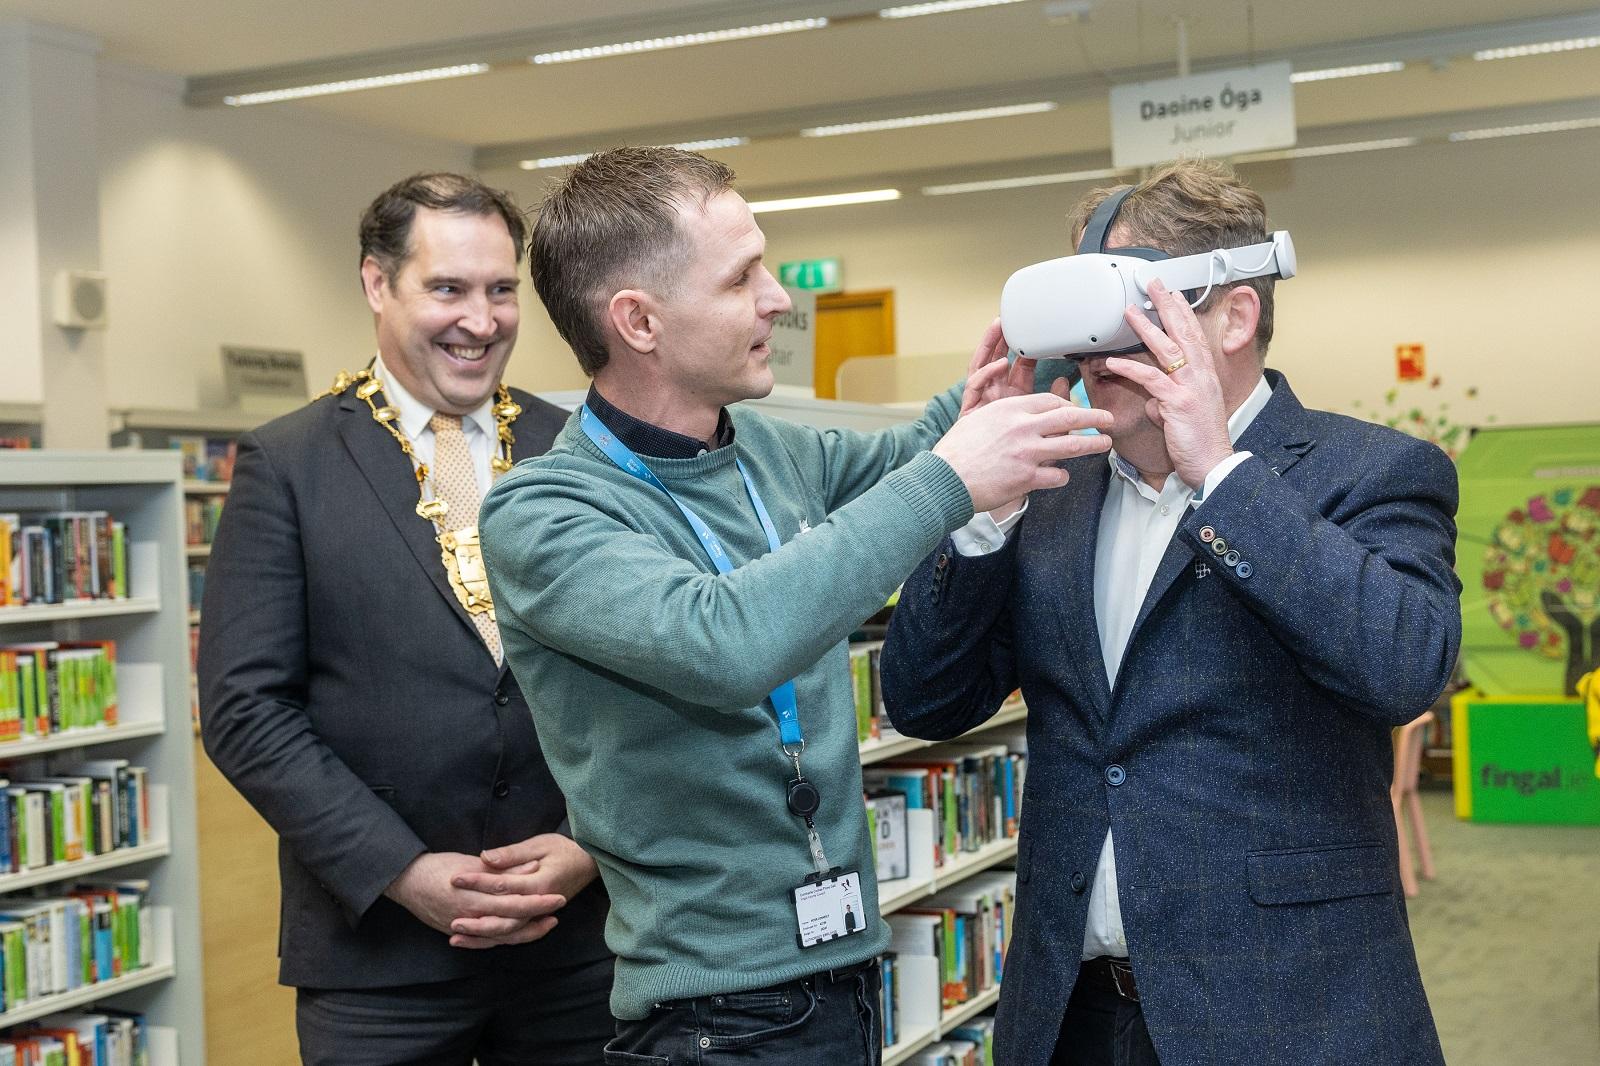 VR sets give a great interactive experience for users of Fingal libraries